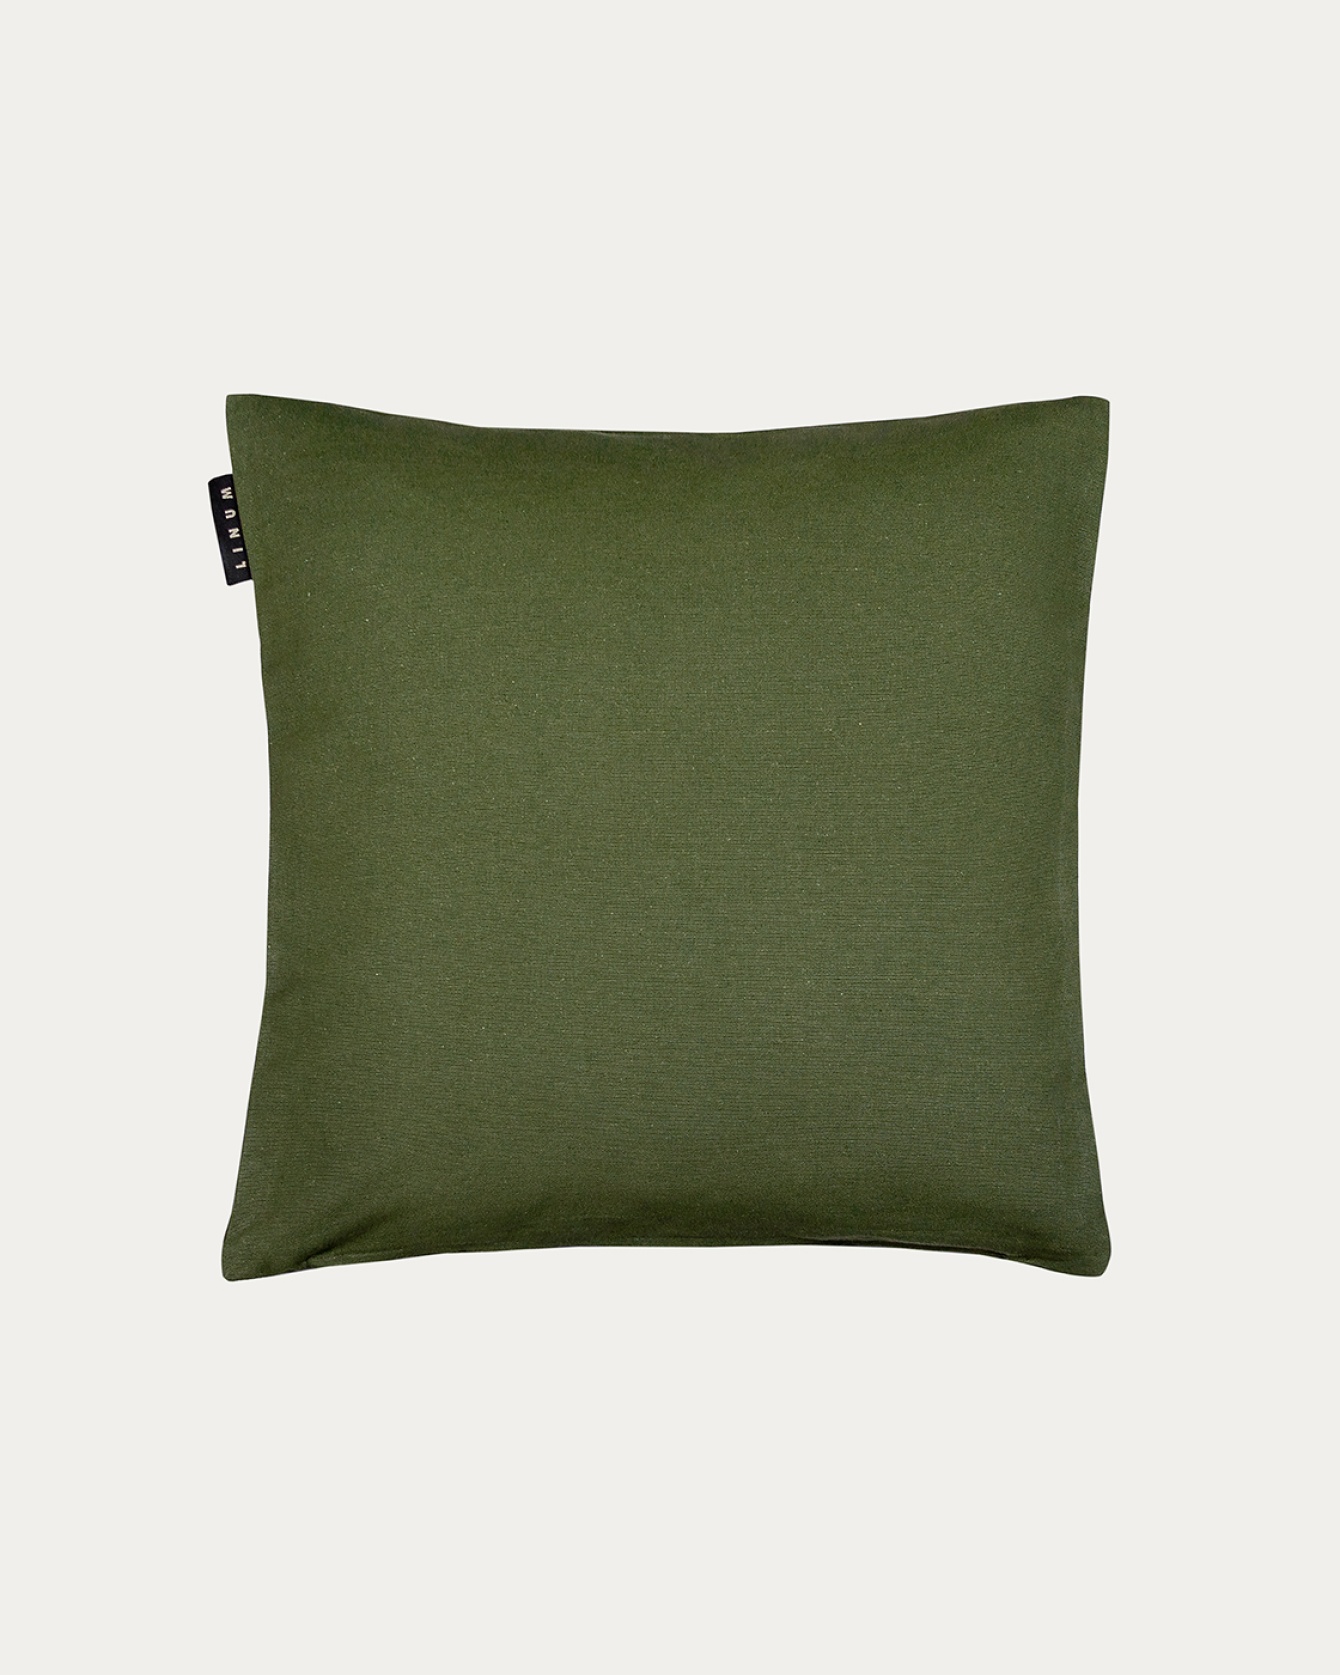 Product image dark olive green ANNABELL cushion cover made of soft cotton from LINUM DESIGN. Size 40x40 cm.